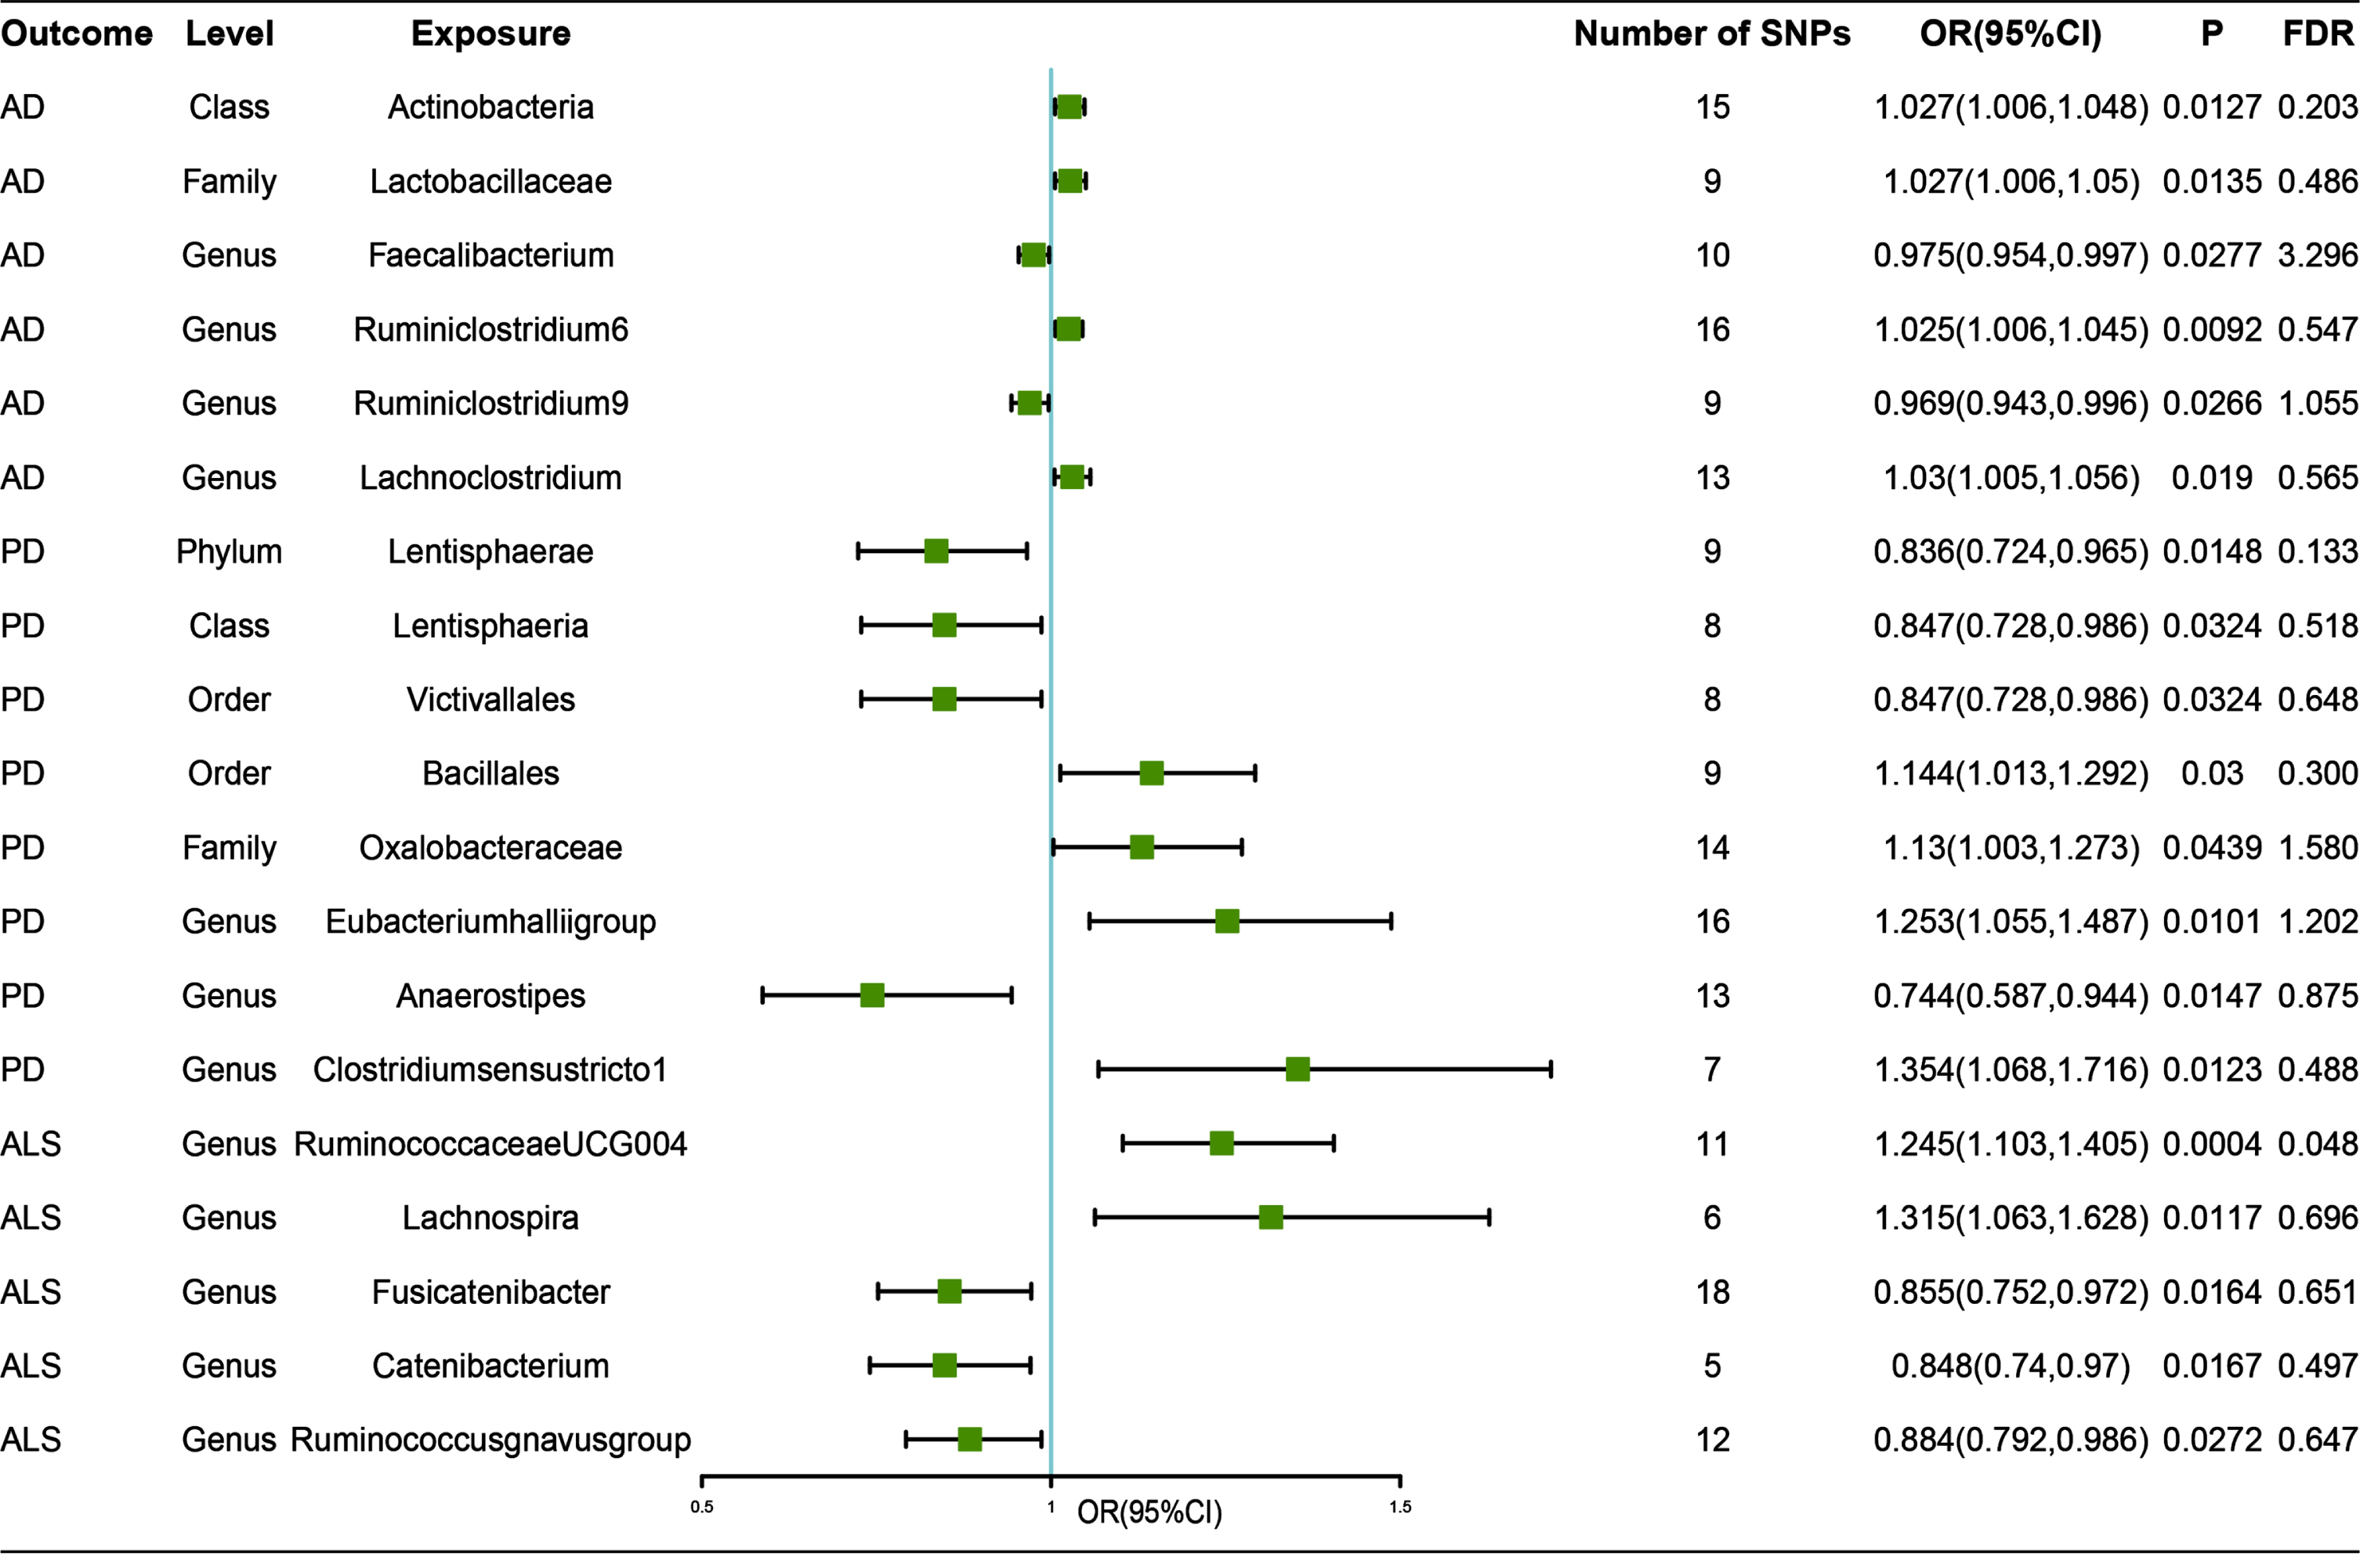 Associations of genetically predicted gut microbiota with risk of neurodegenerative diseases using IVW method. OR, odds ratio; CI, confidence interval; FDR, False discovery rate.